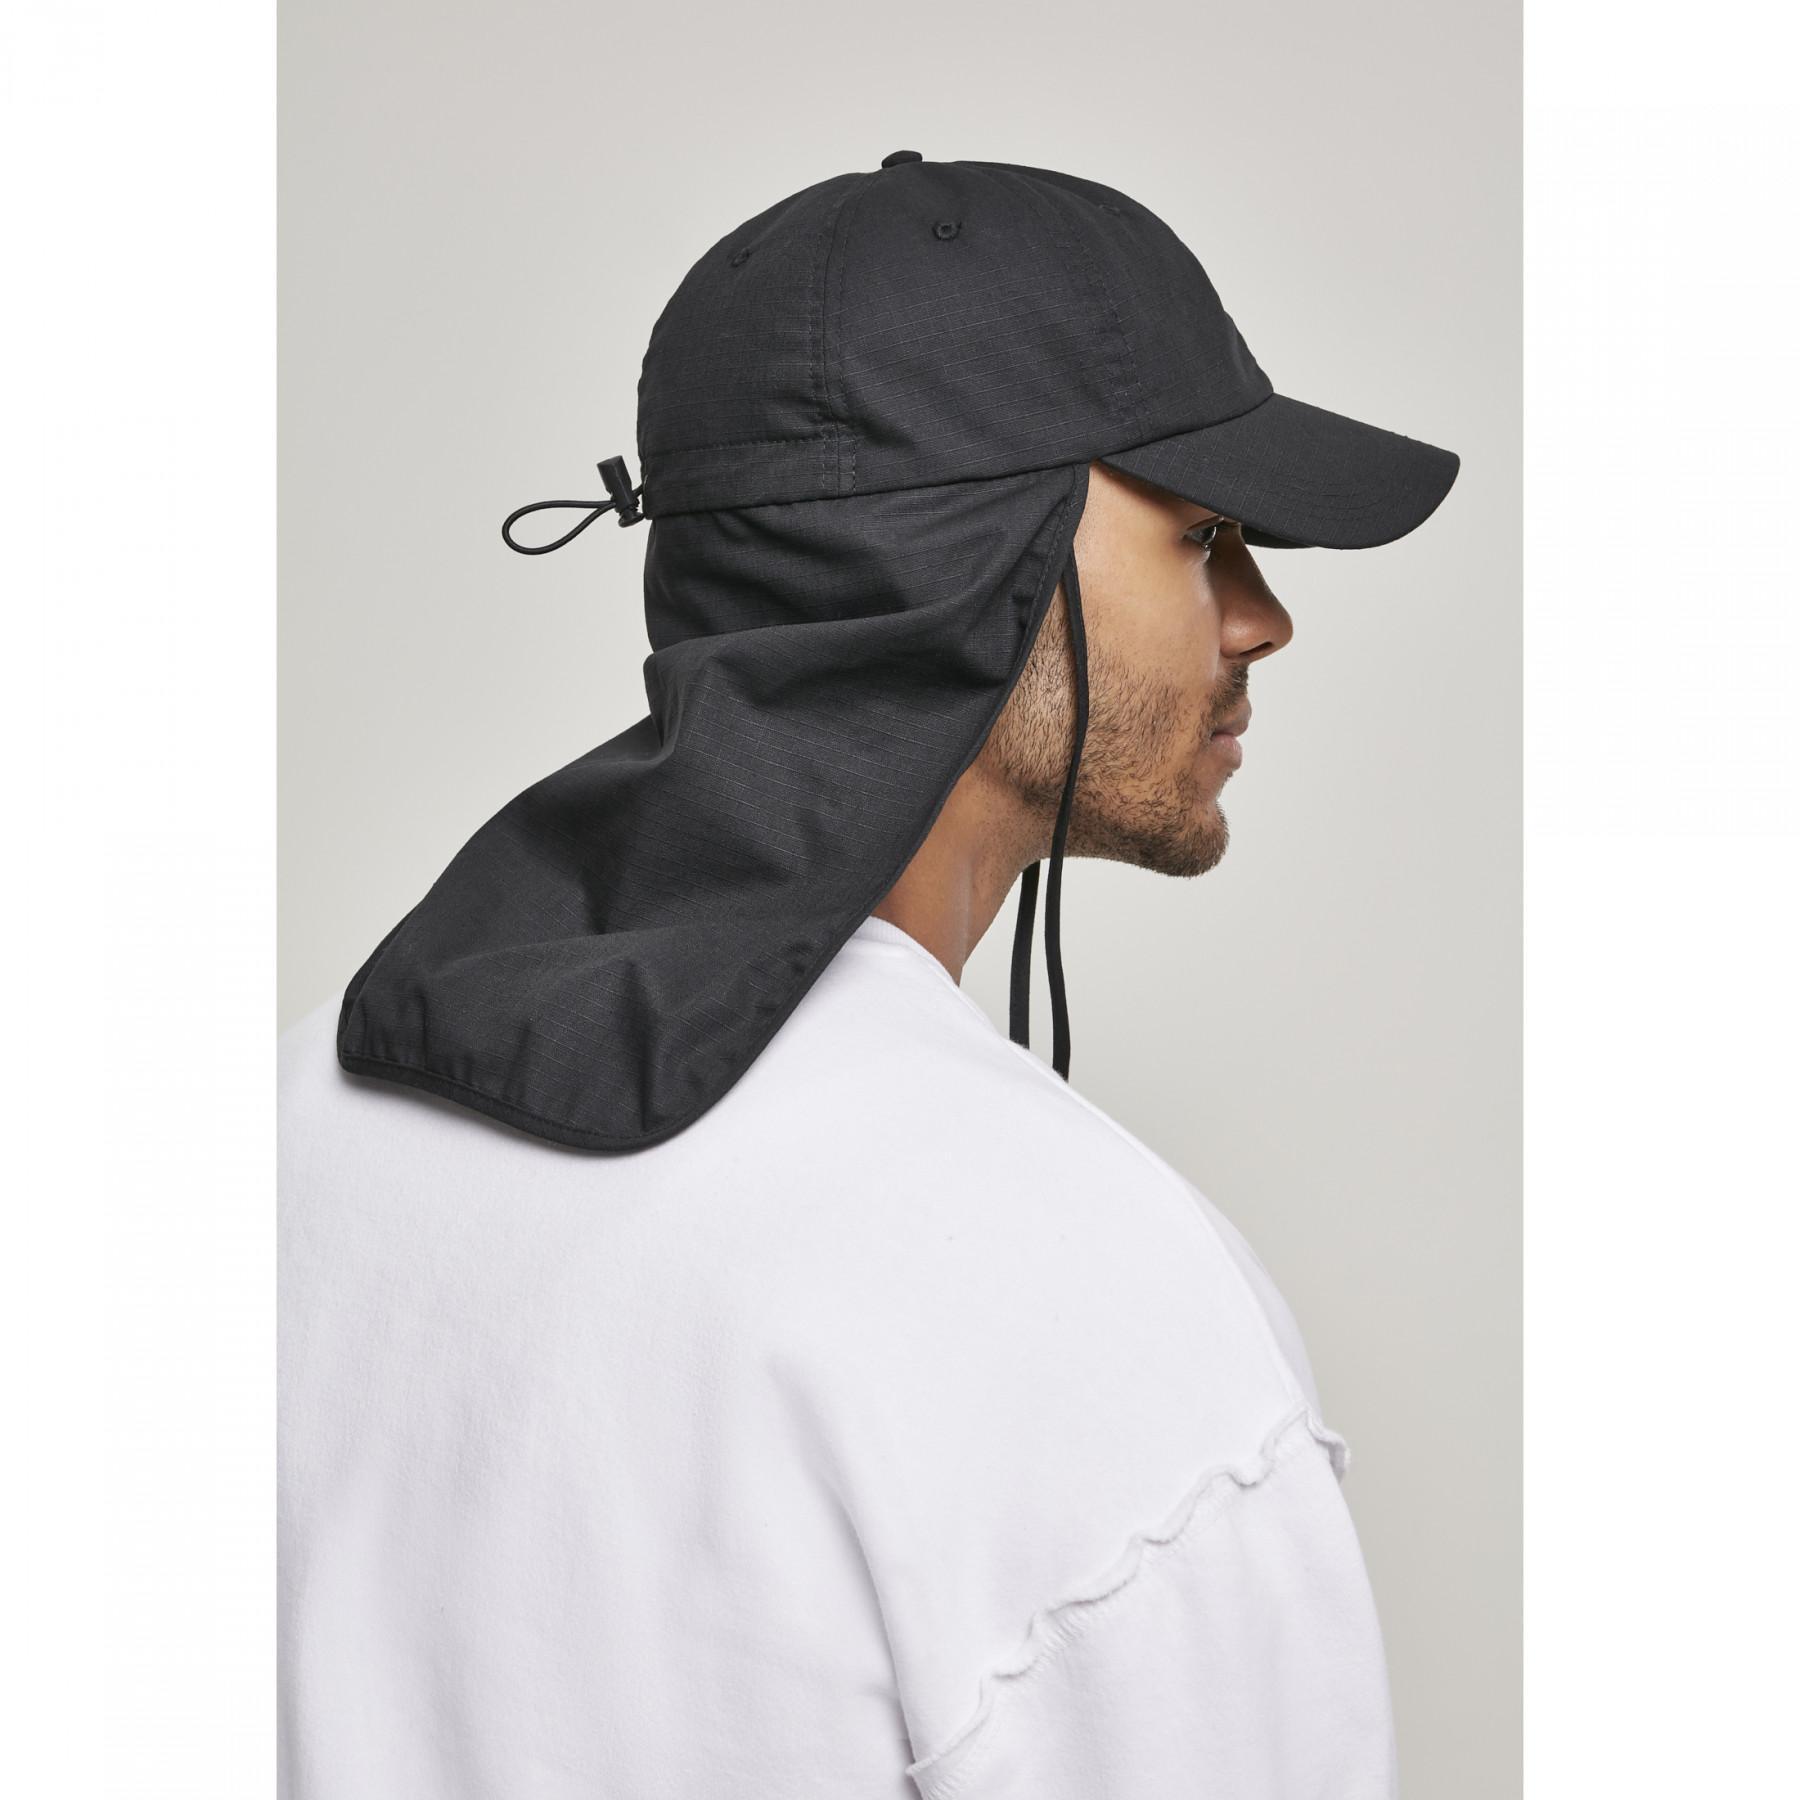 Urban Classic cap with protection